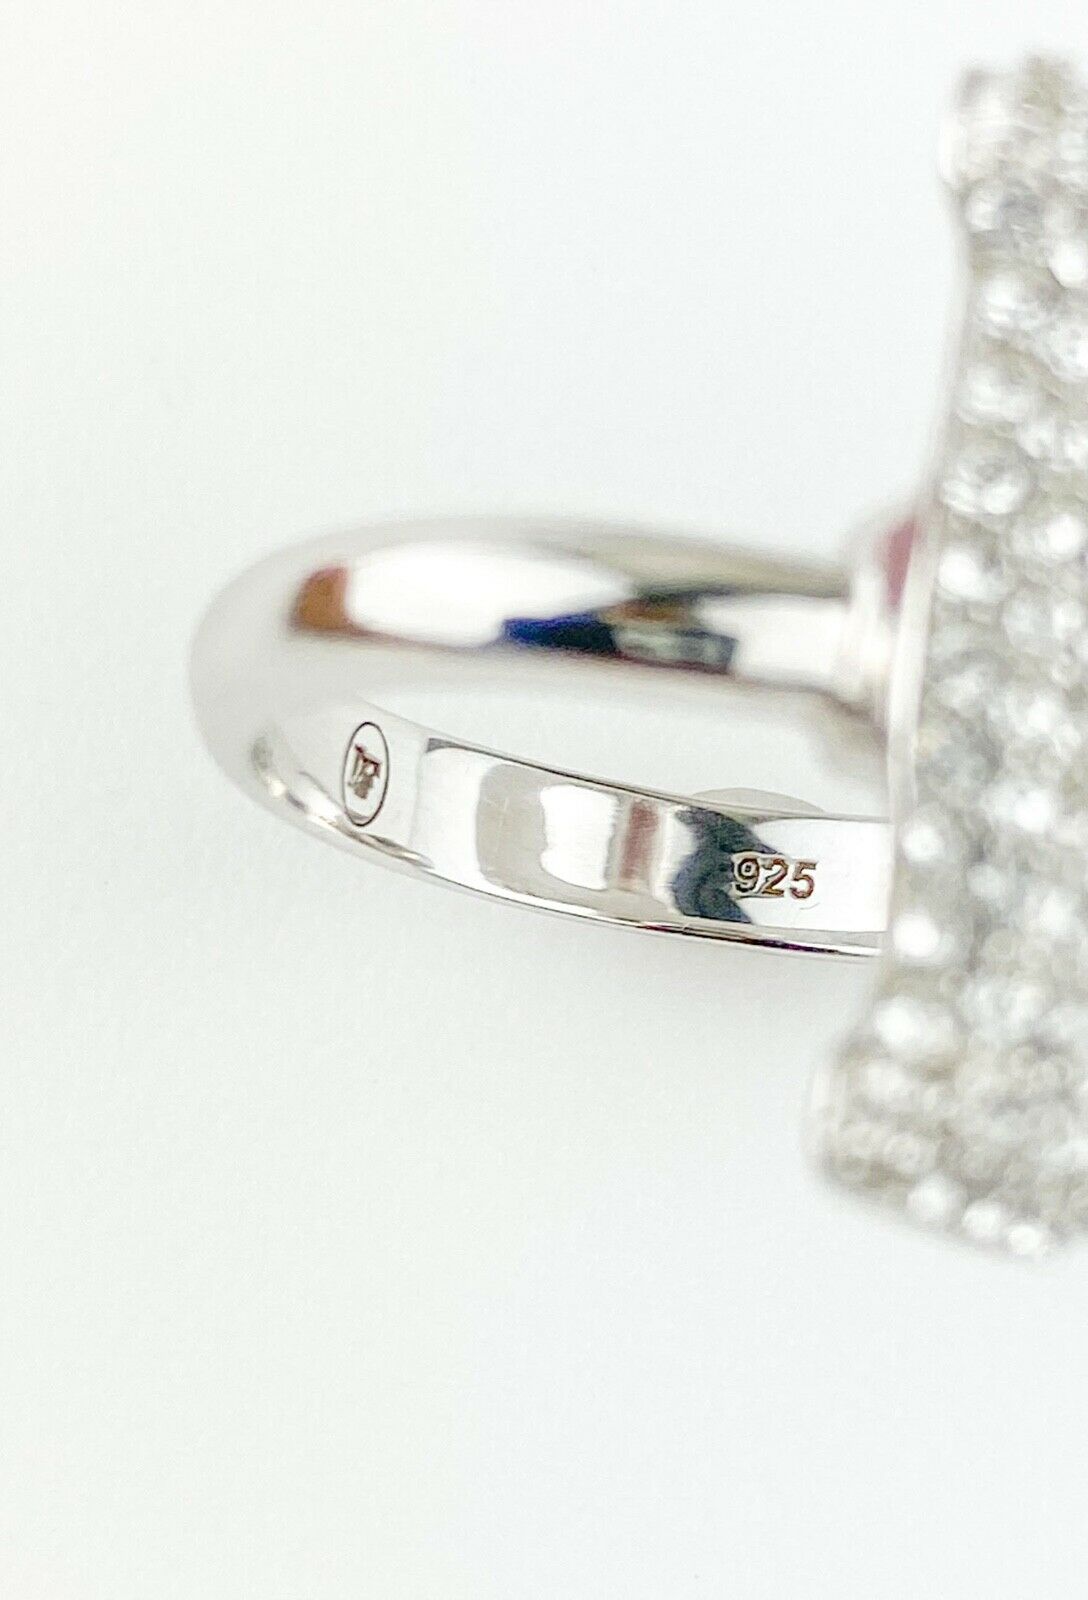 Alphabet Ring Initial I Swarovski Crystals Free Size Sterling Silver 925 Rhodium plated